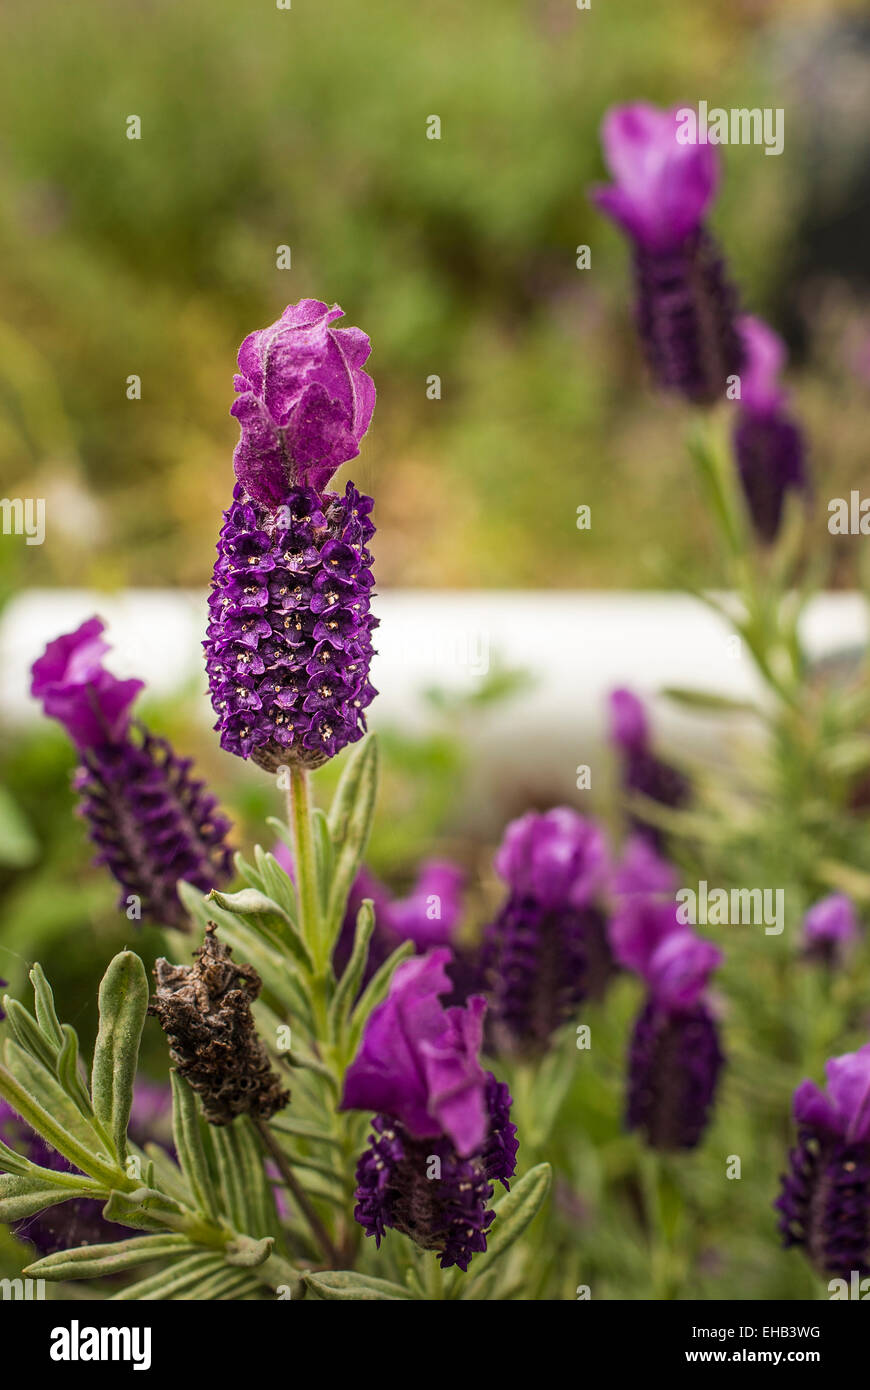 Lavender Devonshire Compact growing in an English garden Stock Photo